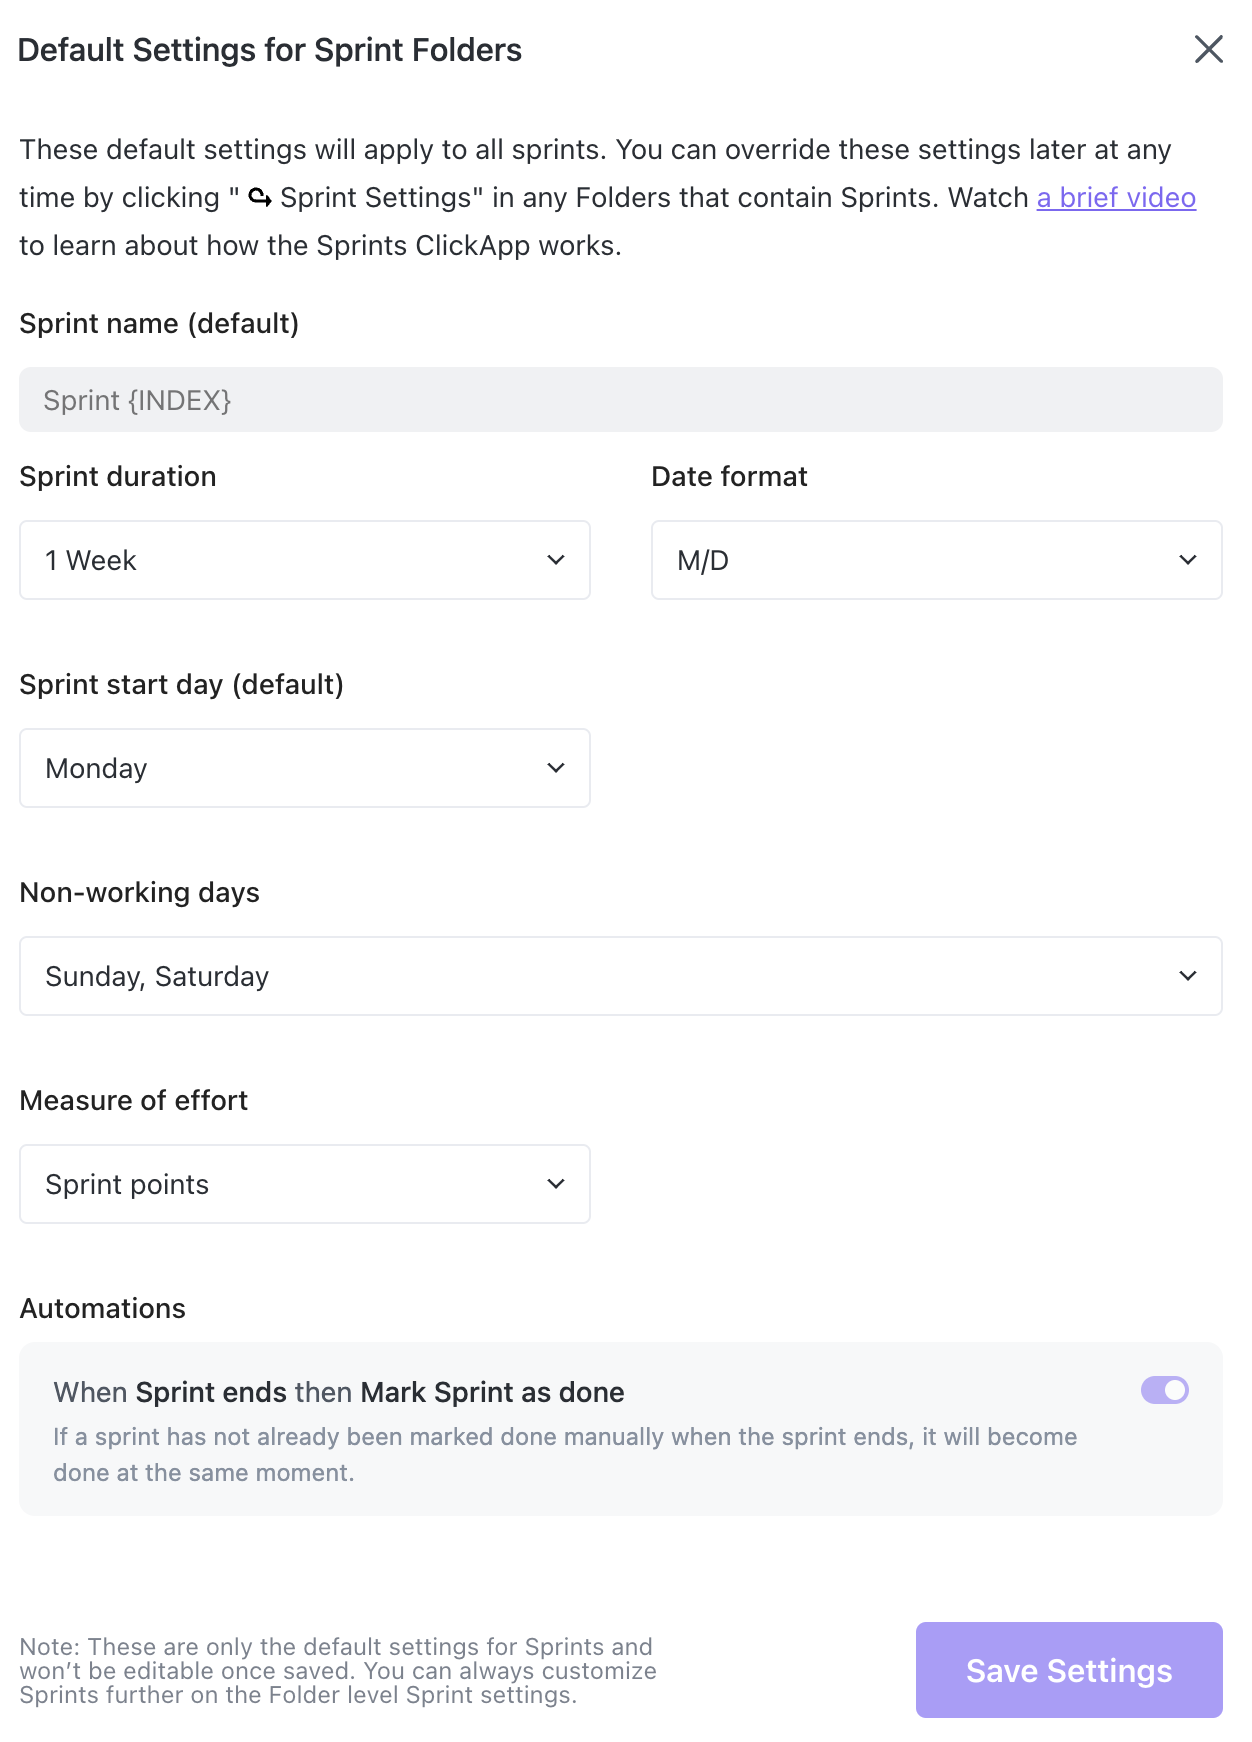 Screenshot of the Default Settings for Sprint Folders modal showing all of the optional settings explained in the text below.